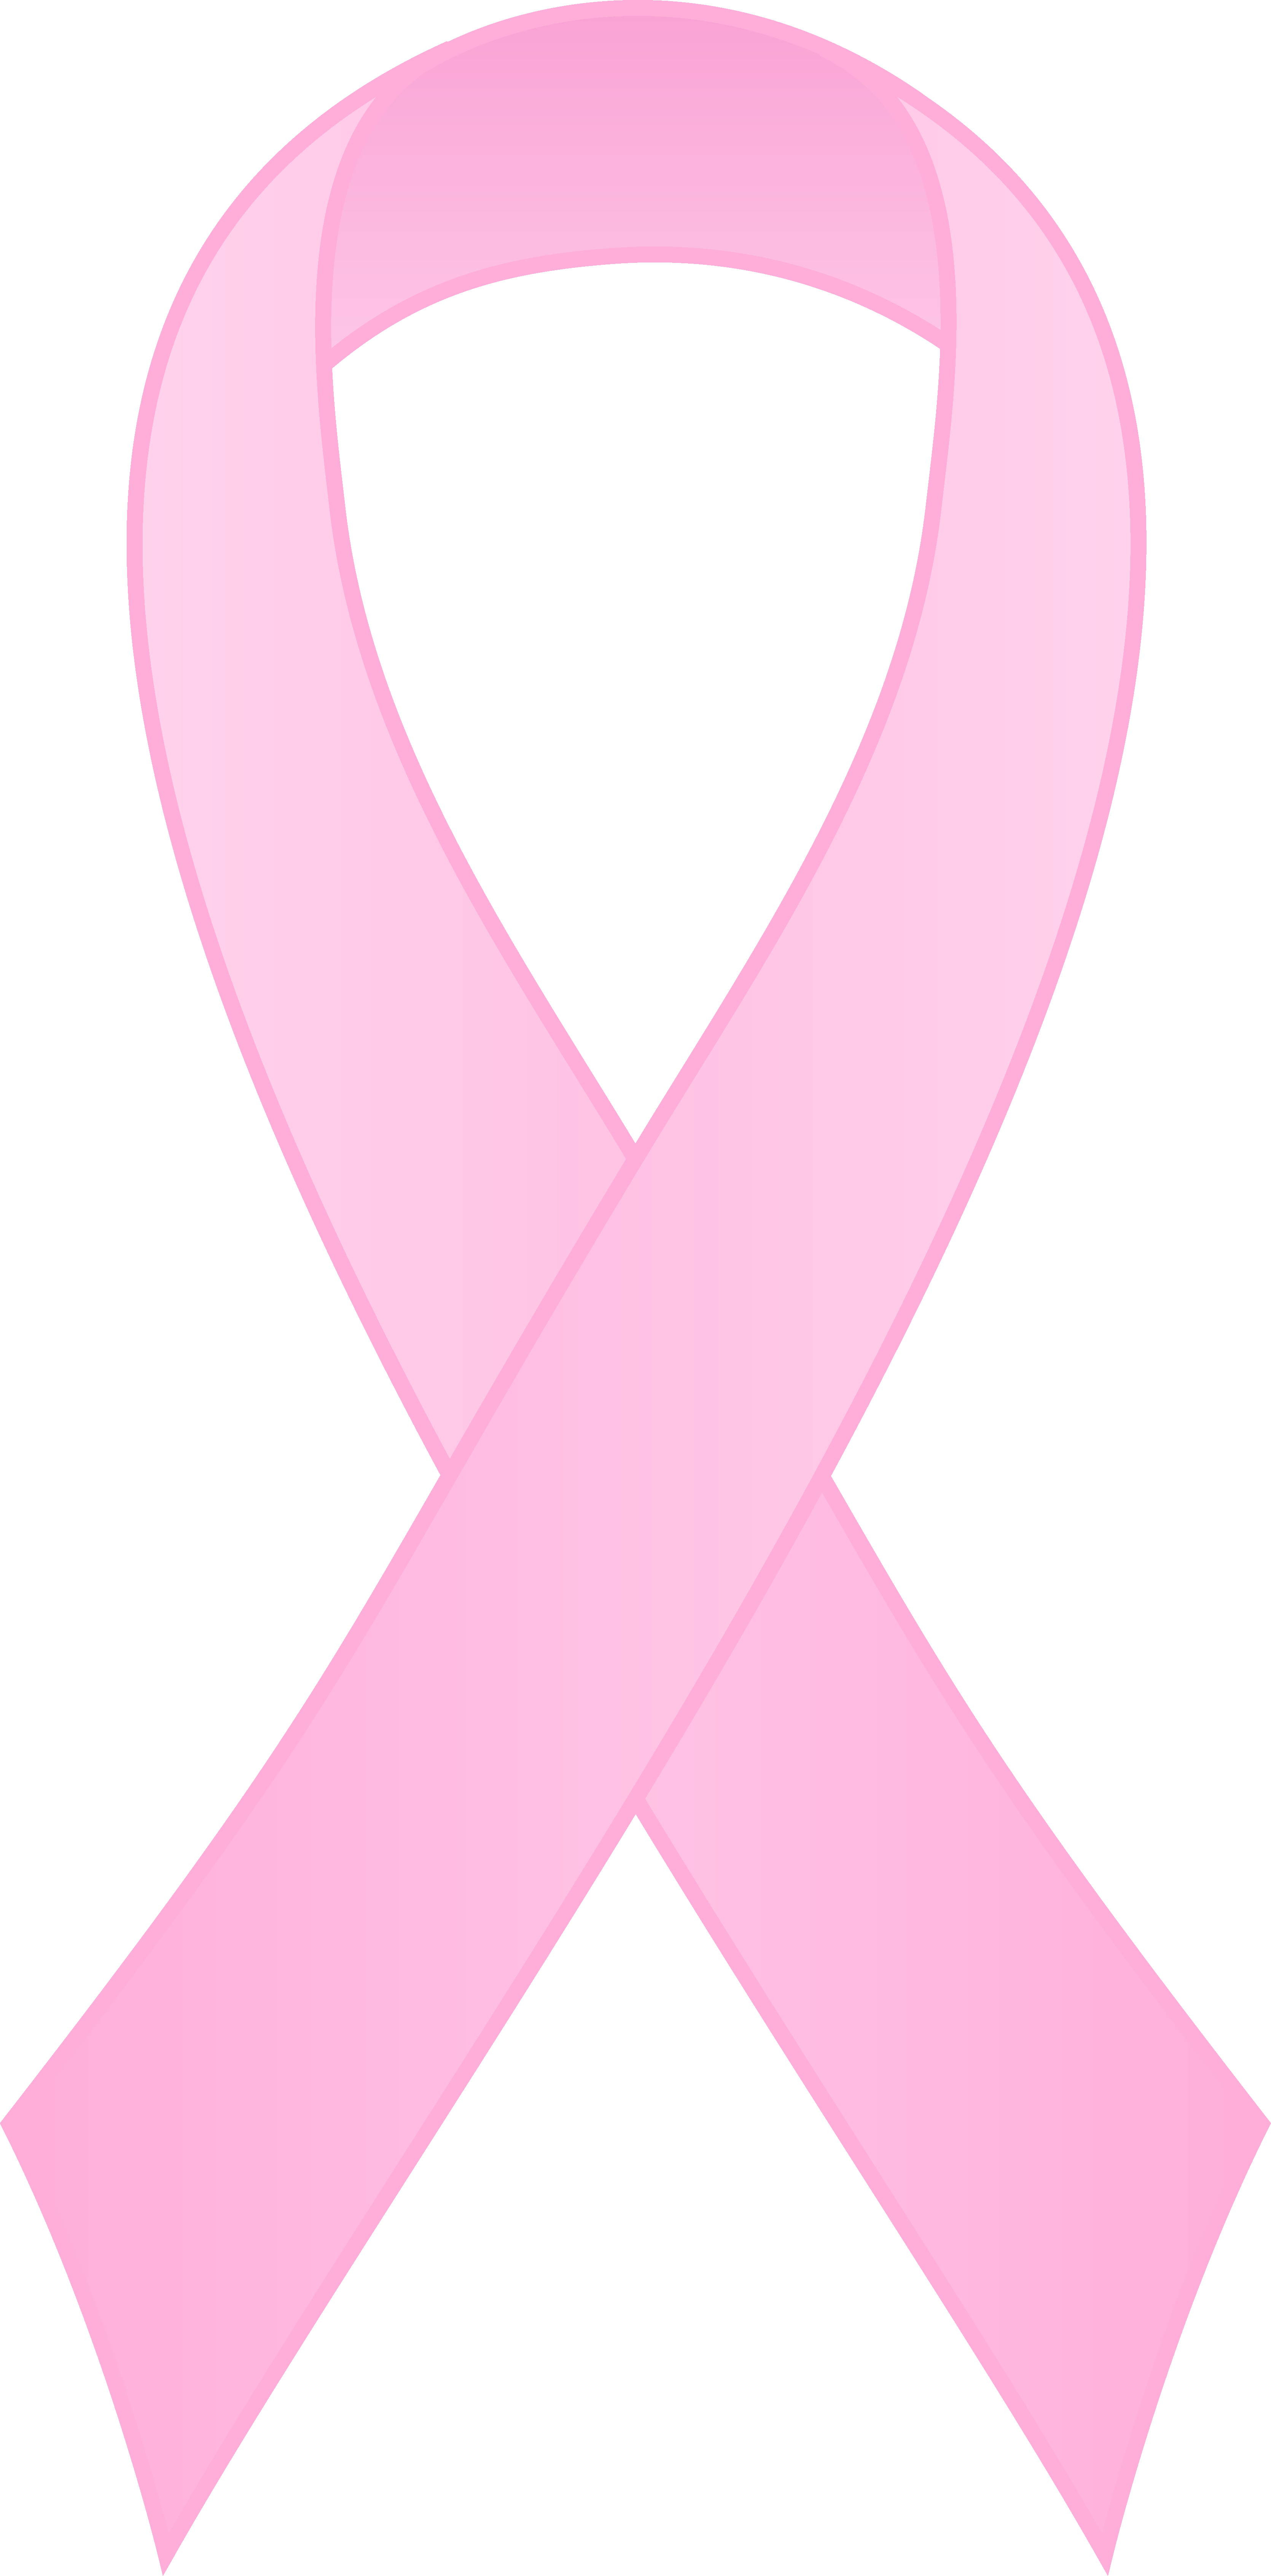 Cancer Ribbon Outline Vector at GetDrawings Free download